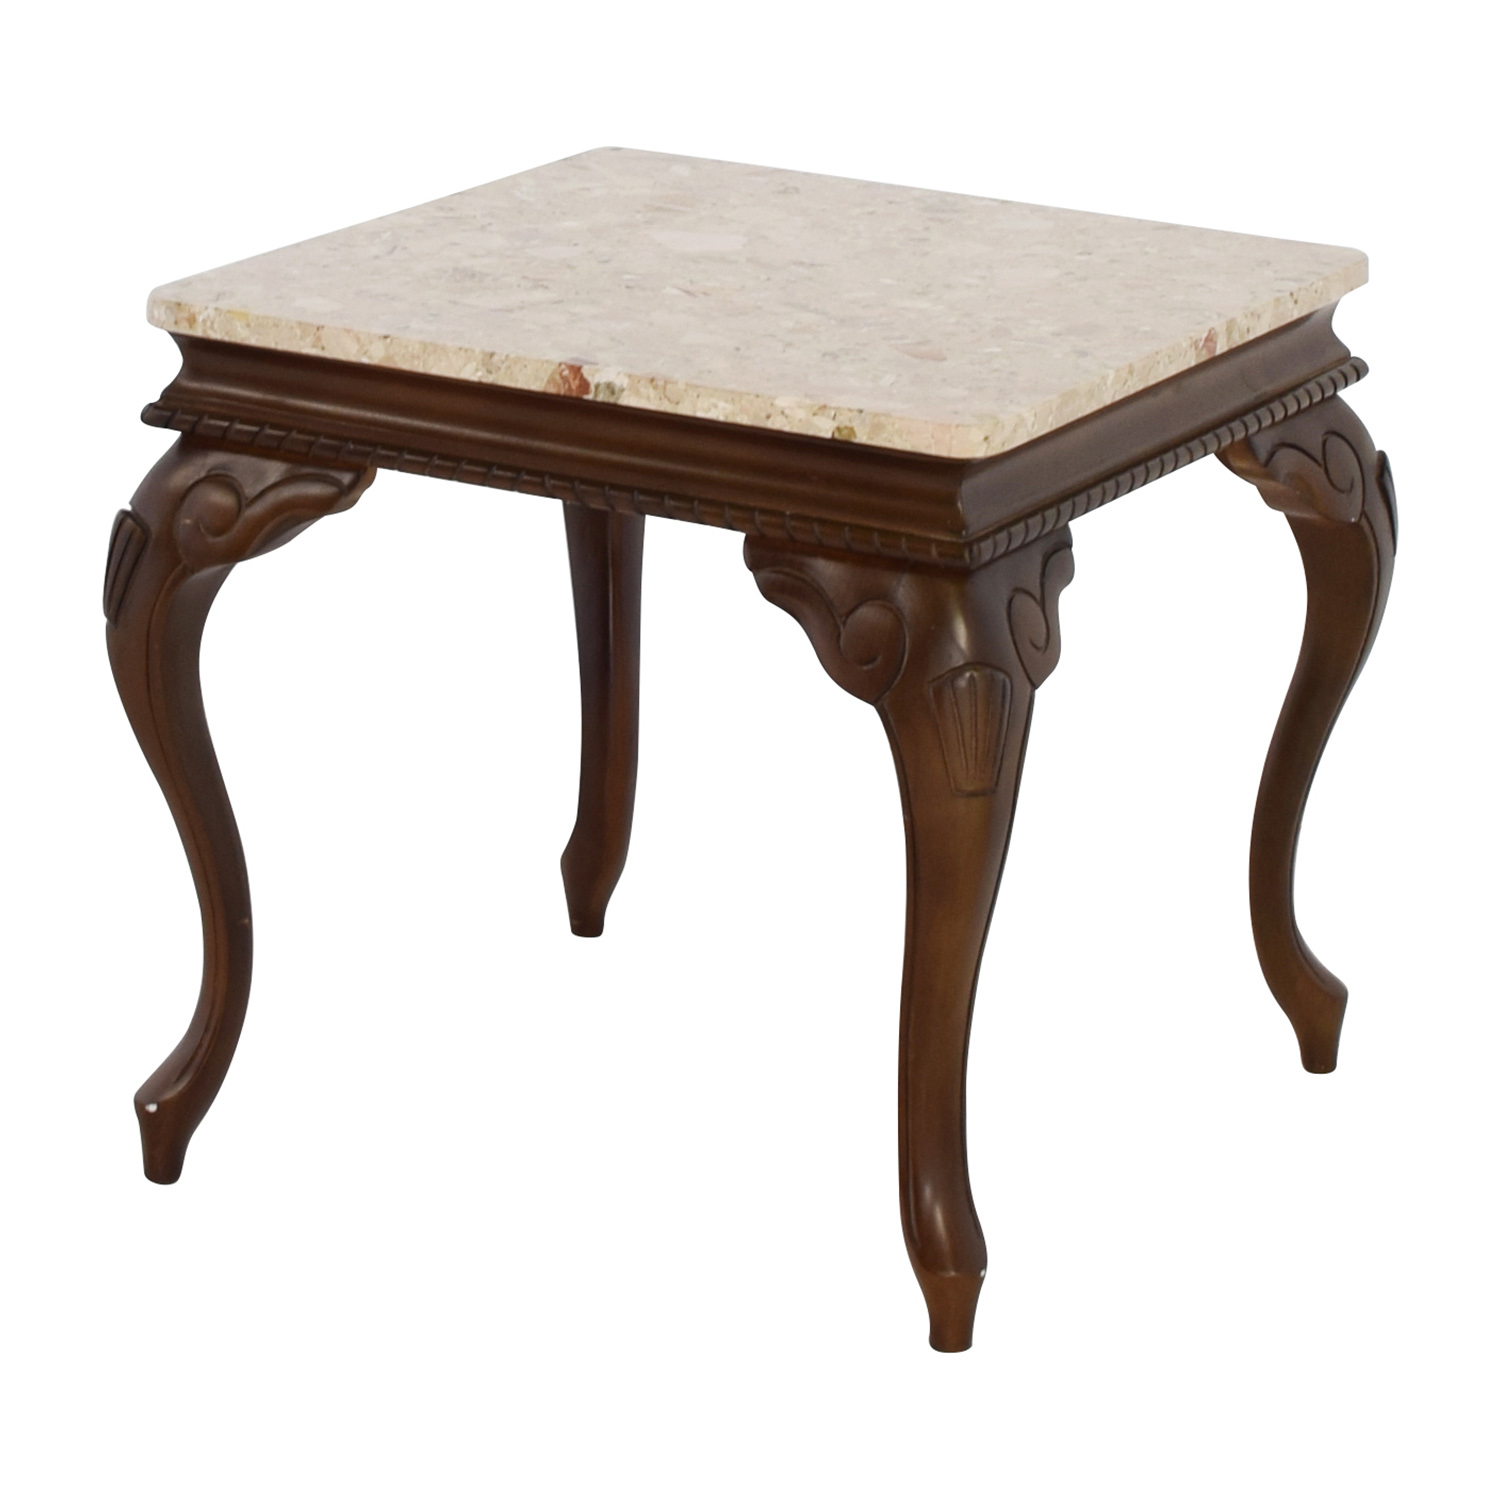 off marble top end table tables used furniture wide console magnolia home products laura ashley dining sectional outdoor bedside dresser mitylite square patio handmade antique two